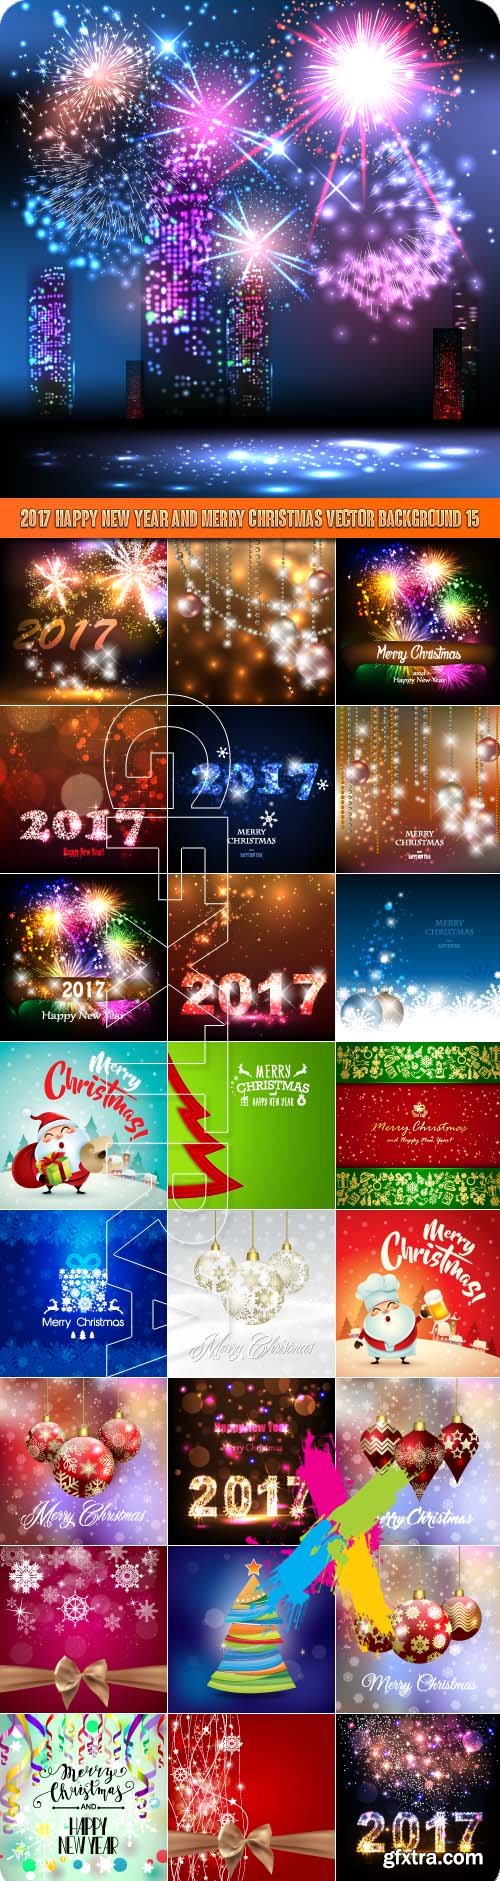 2017 Happy New Year and Merry Christmas vector background 15